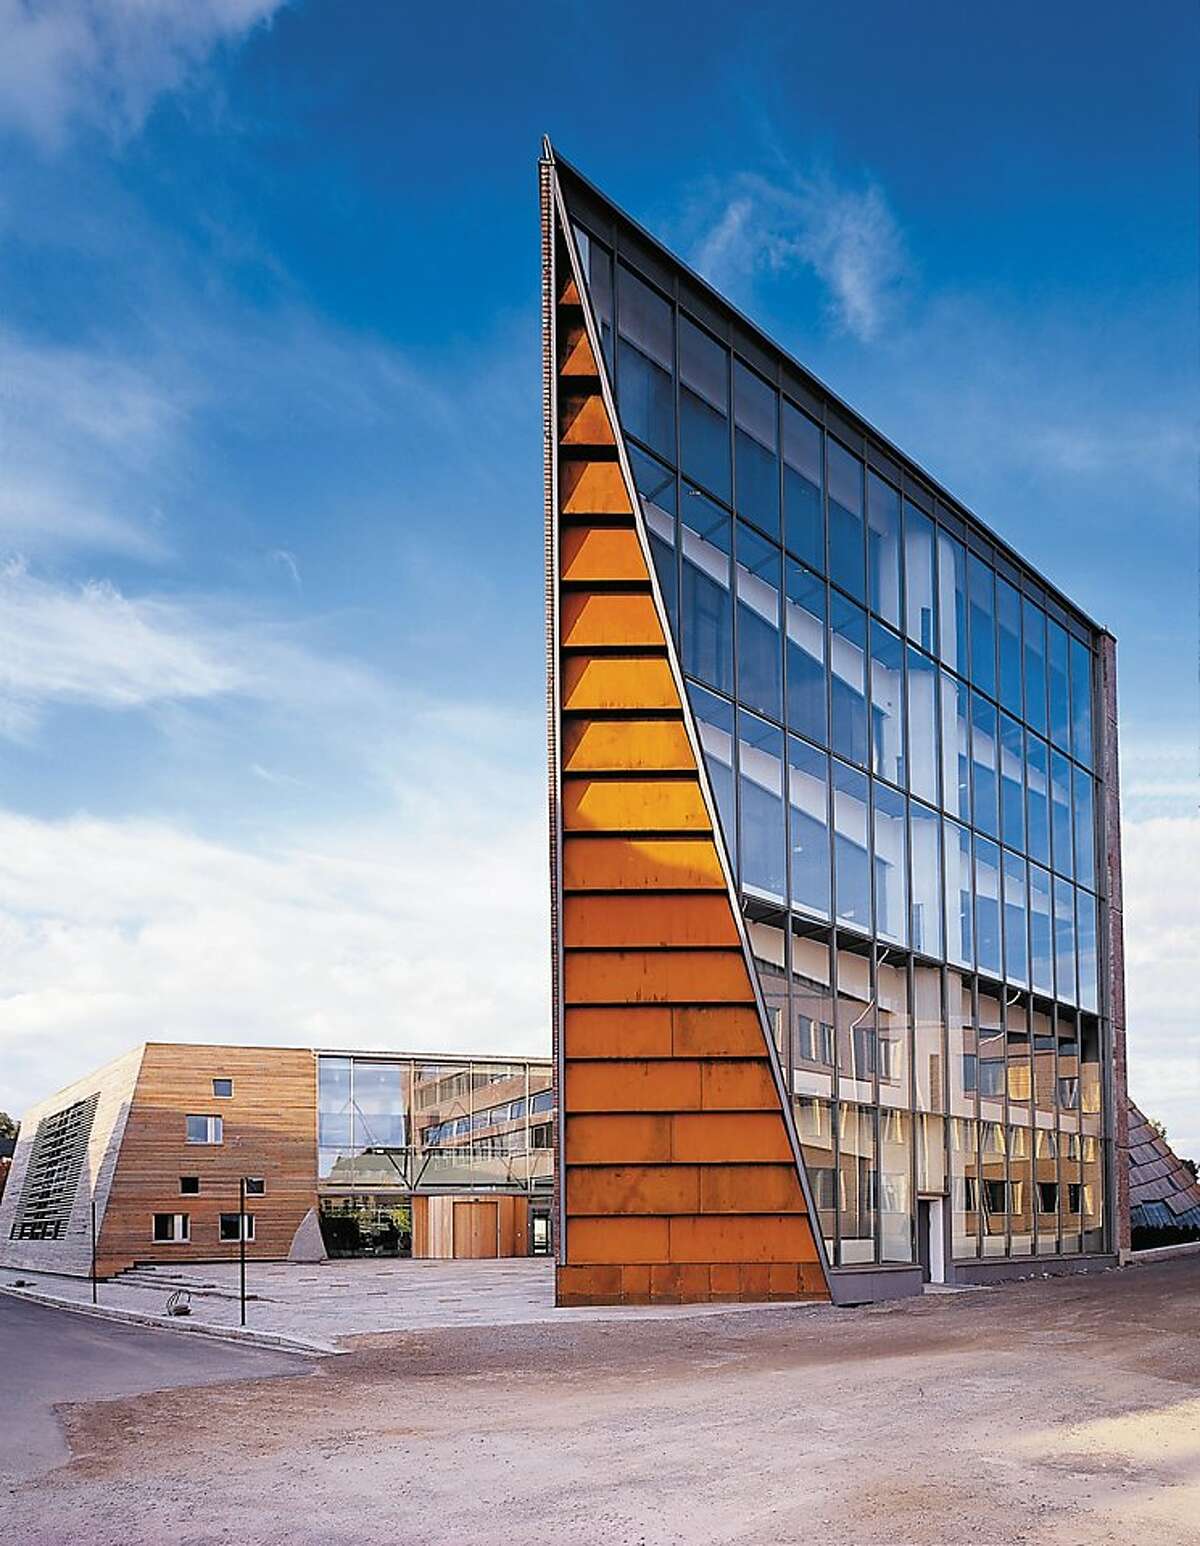 The Town Hall in Hamar, Norway is designed by Snohetta, the architecture firm selected to design the new wing of SFMOMA